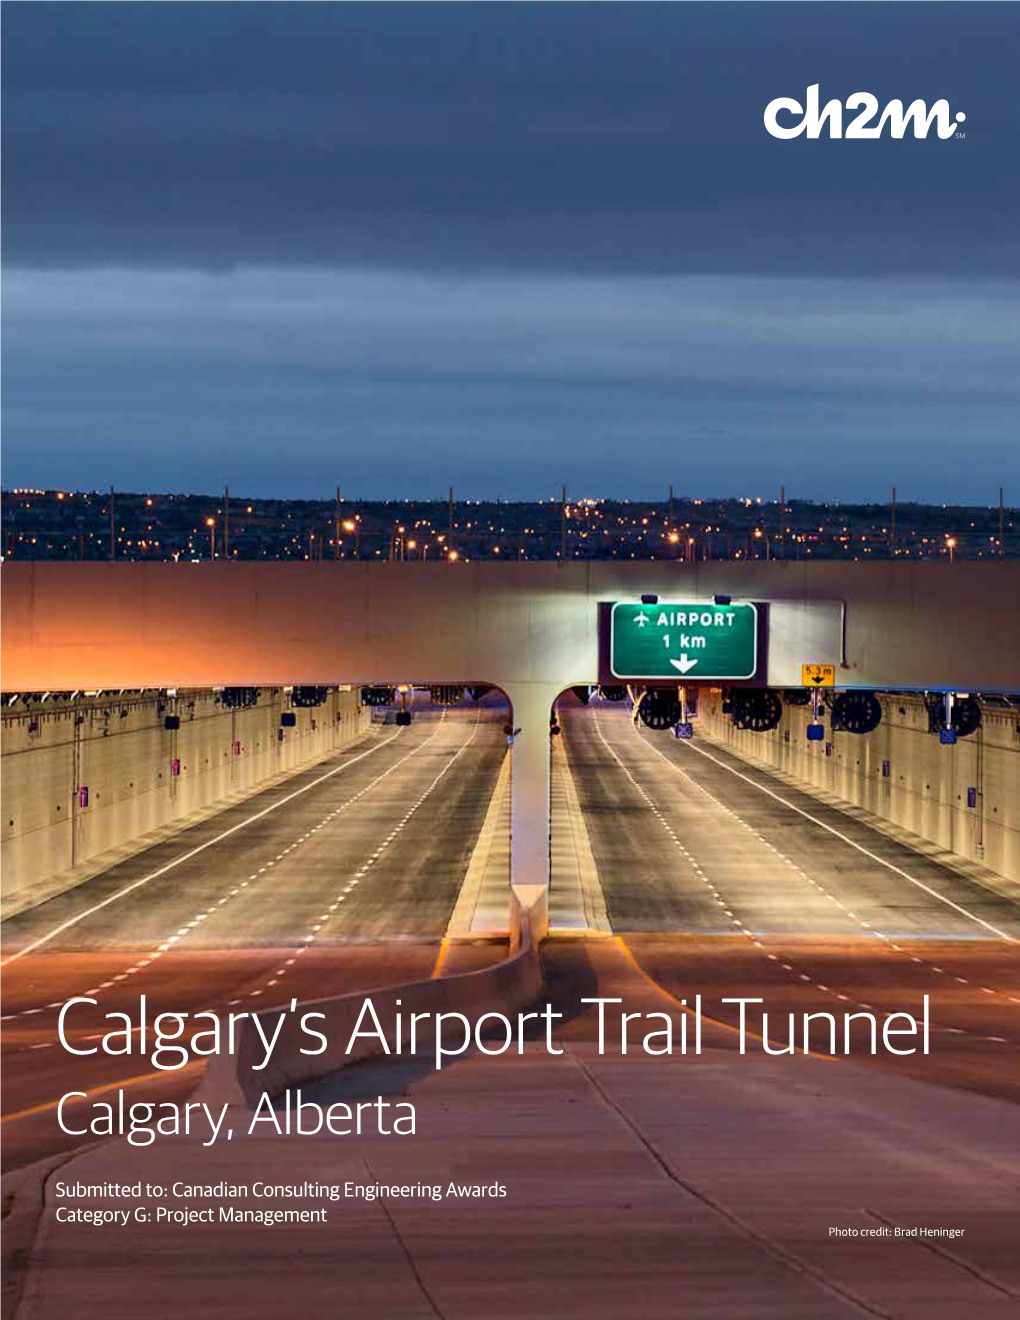 Calgary's Airport Trail Tunnel